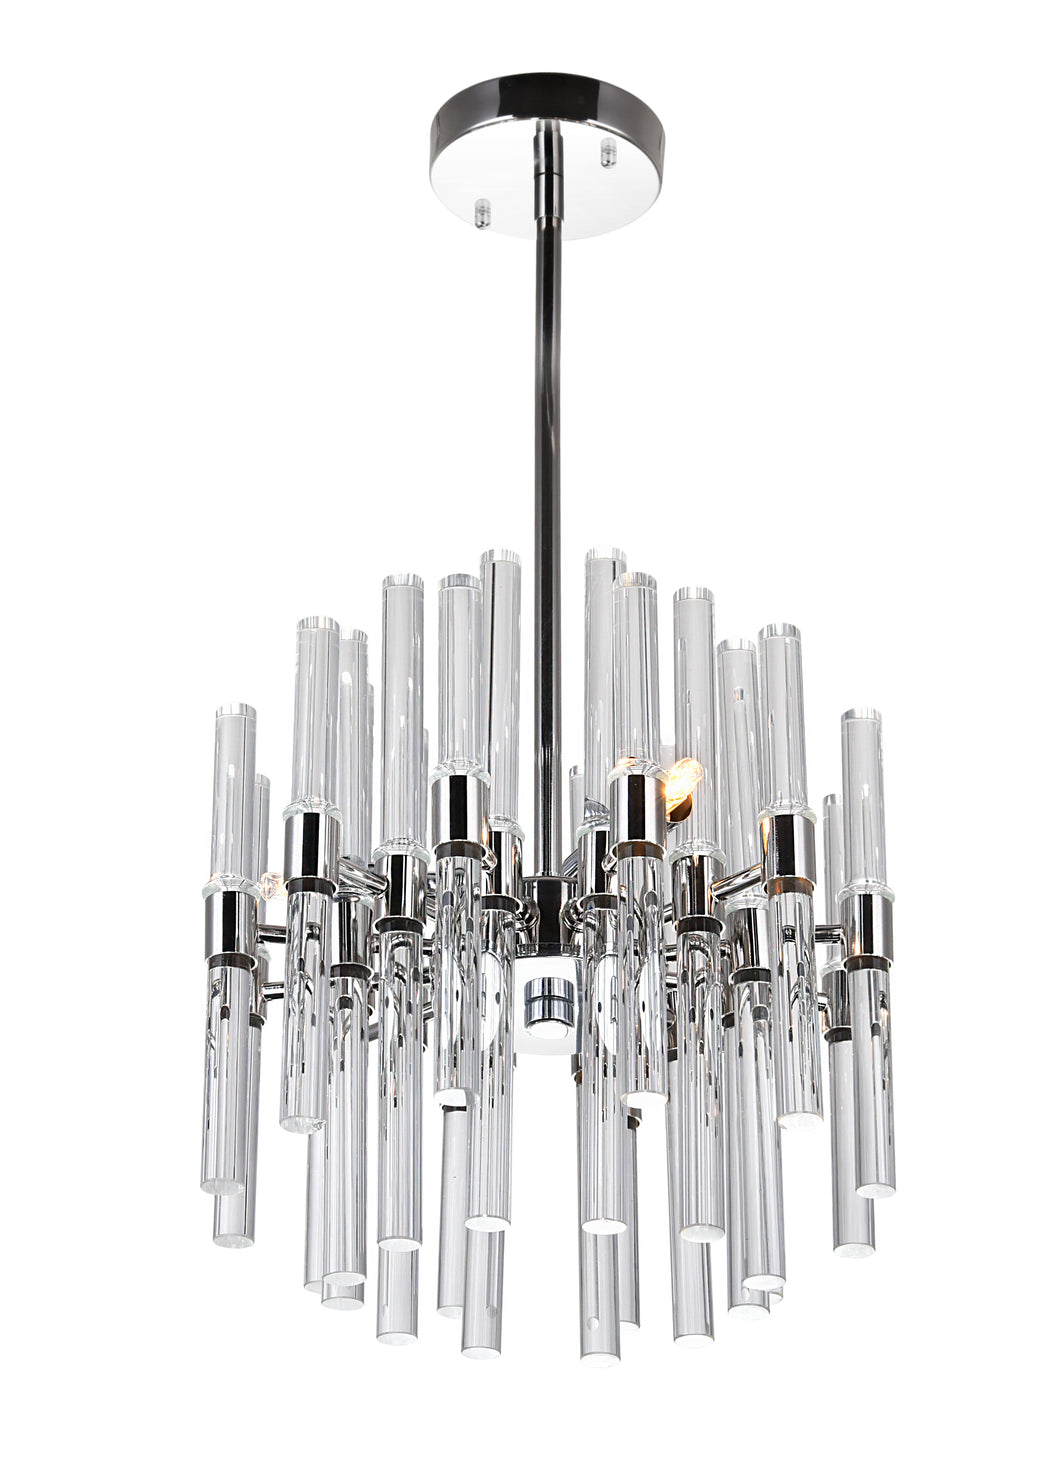 3 Light Mini Chandelier with Polished Nickel Finish